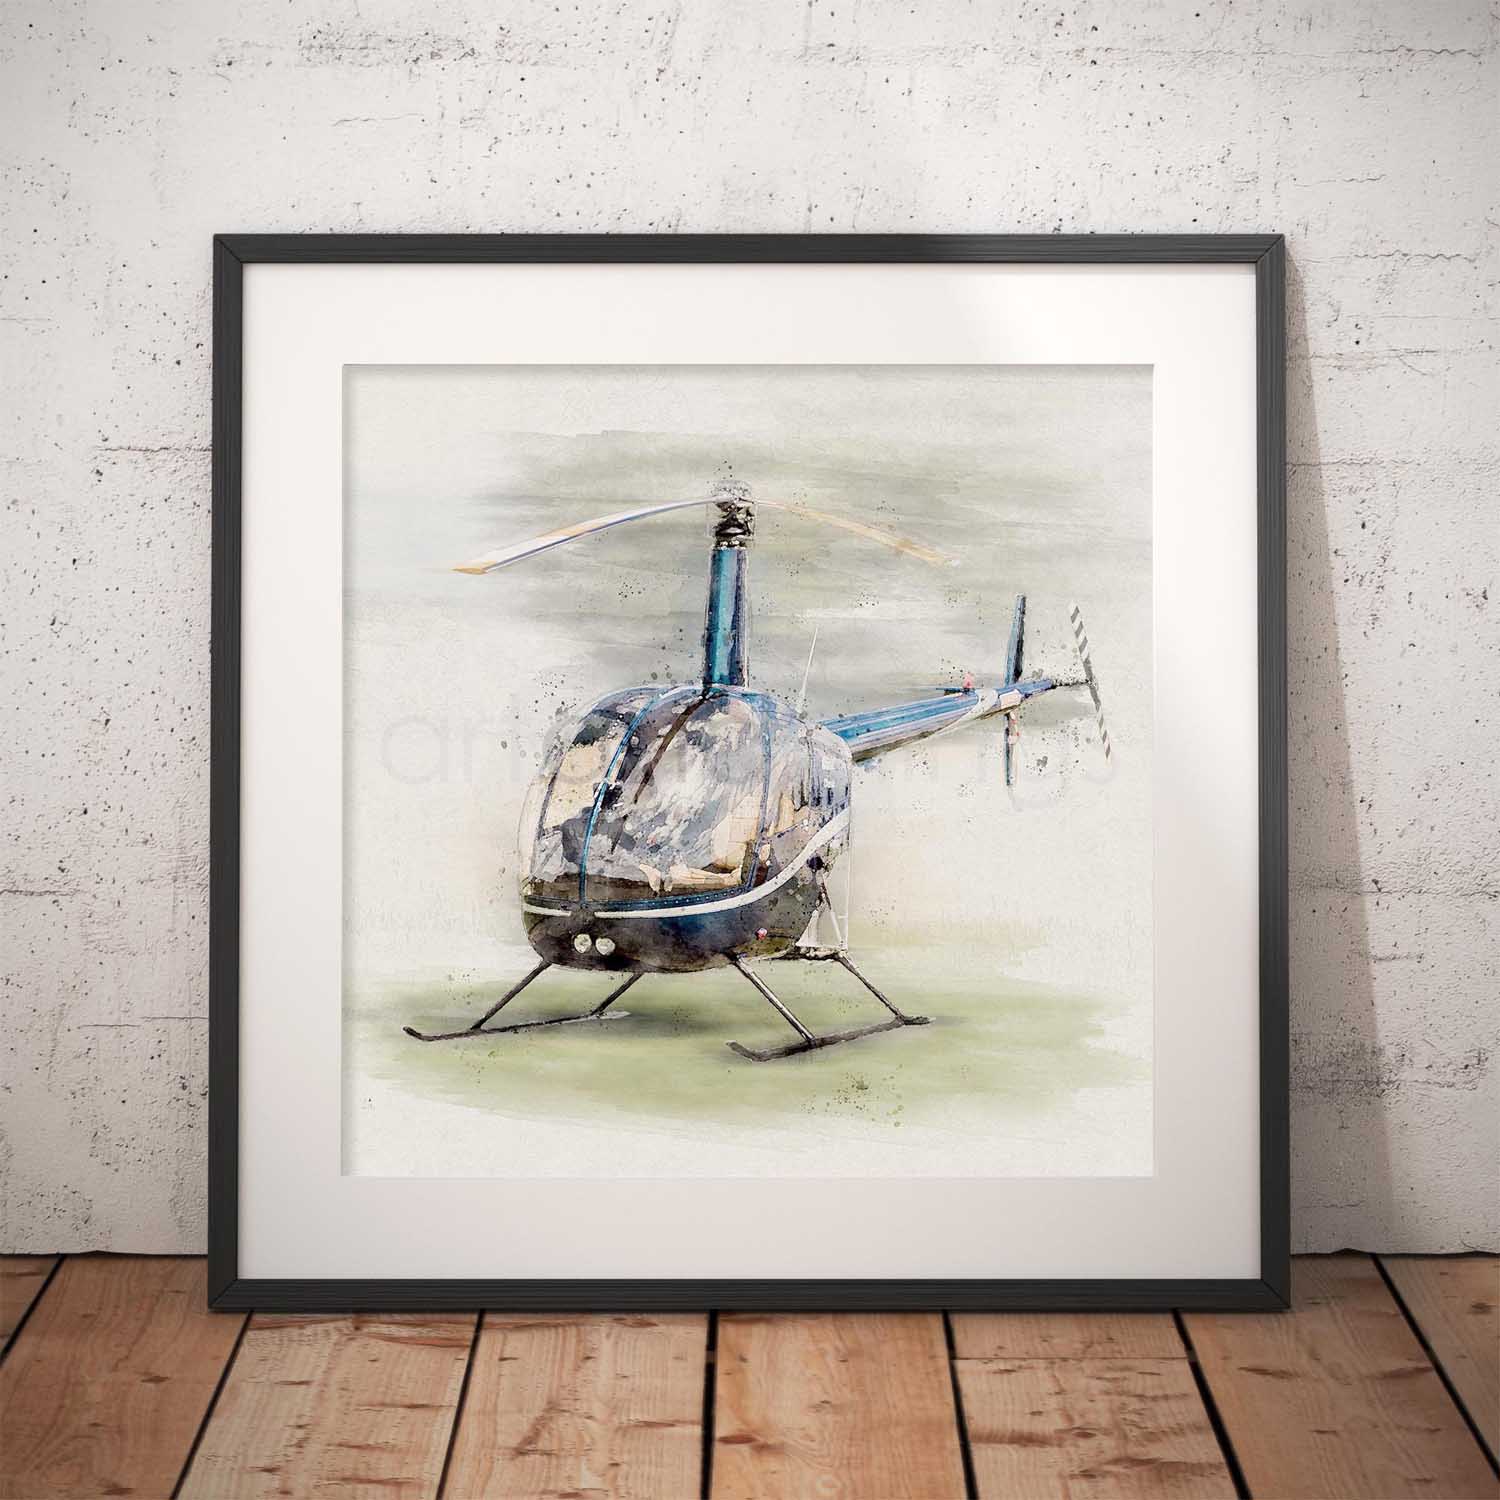 Robinson R22 Helicopter Wall Art